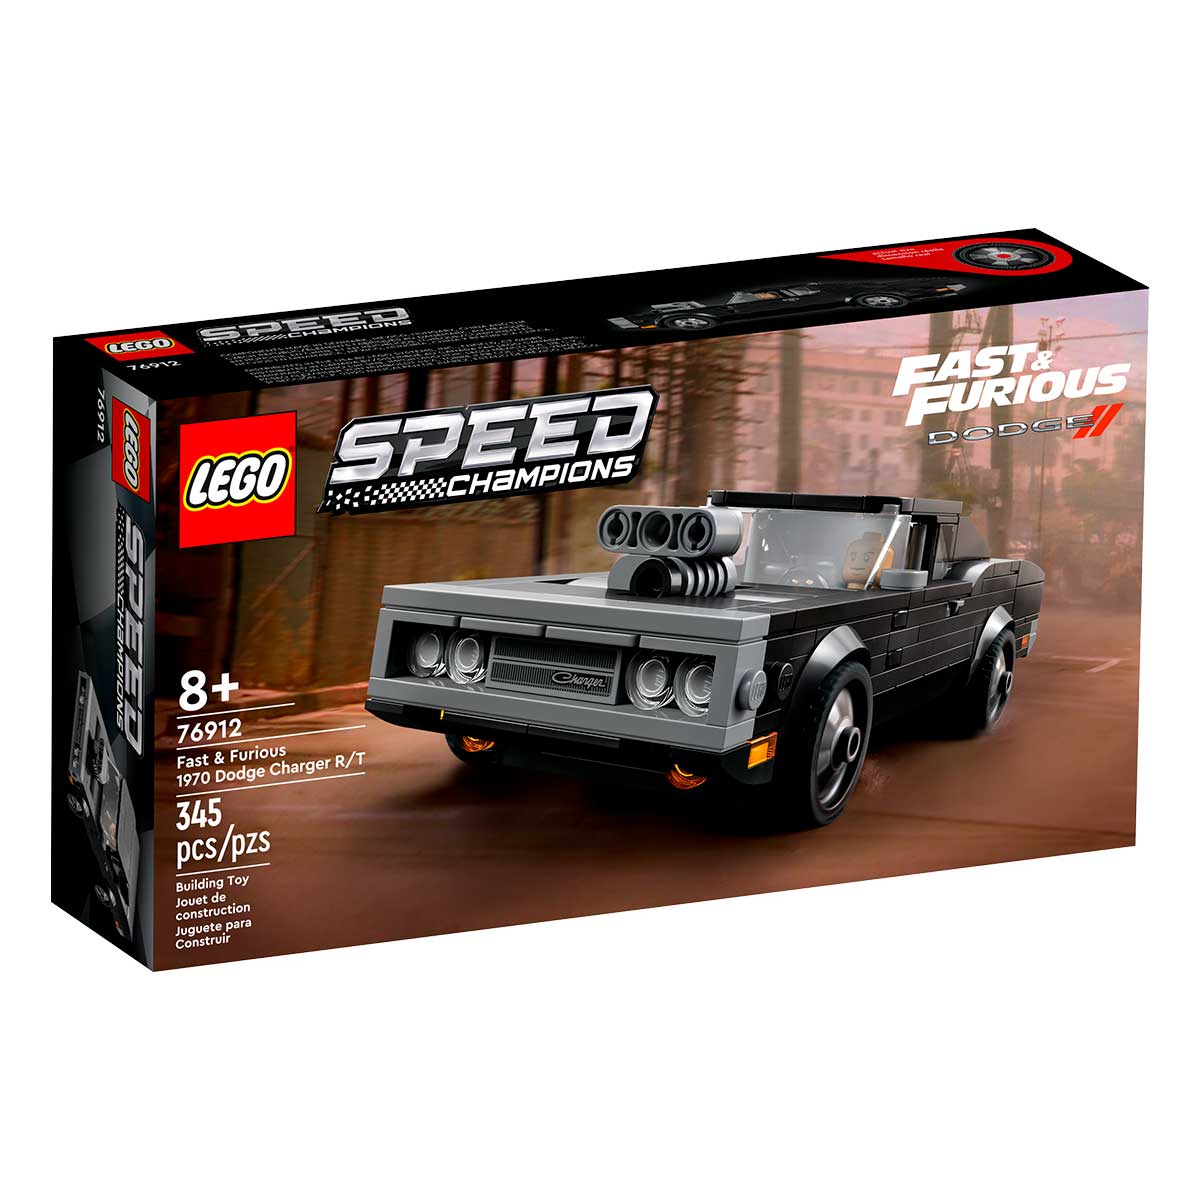 LEGO Speed Champions - Fast & Furious 1970 Dodge Charger R/T - 76912